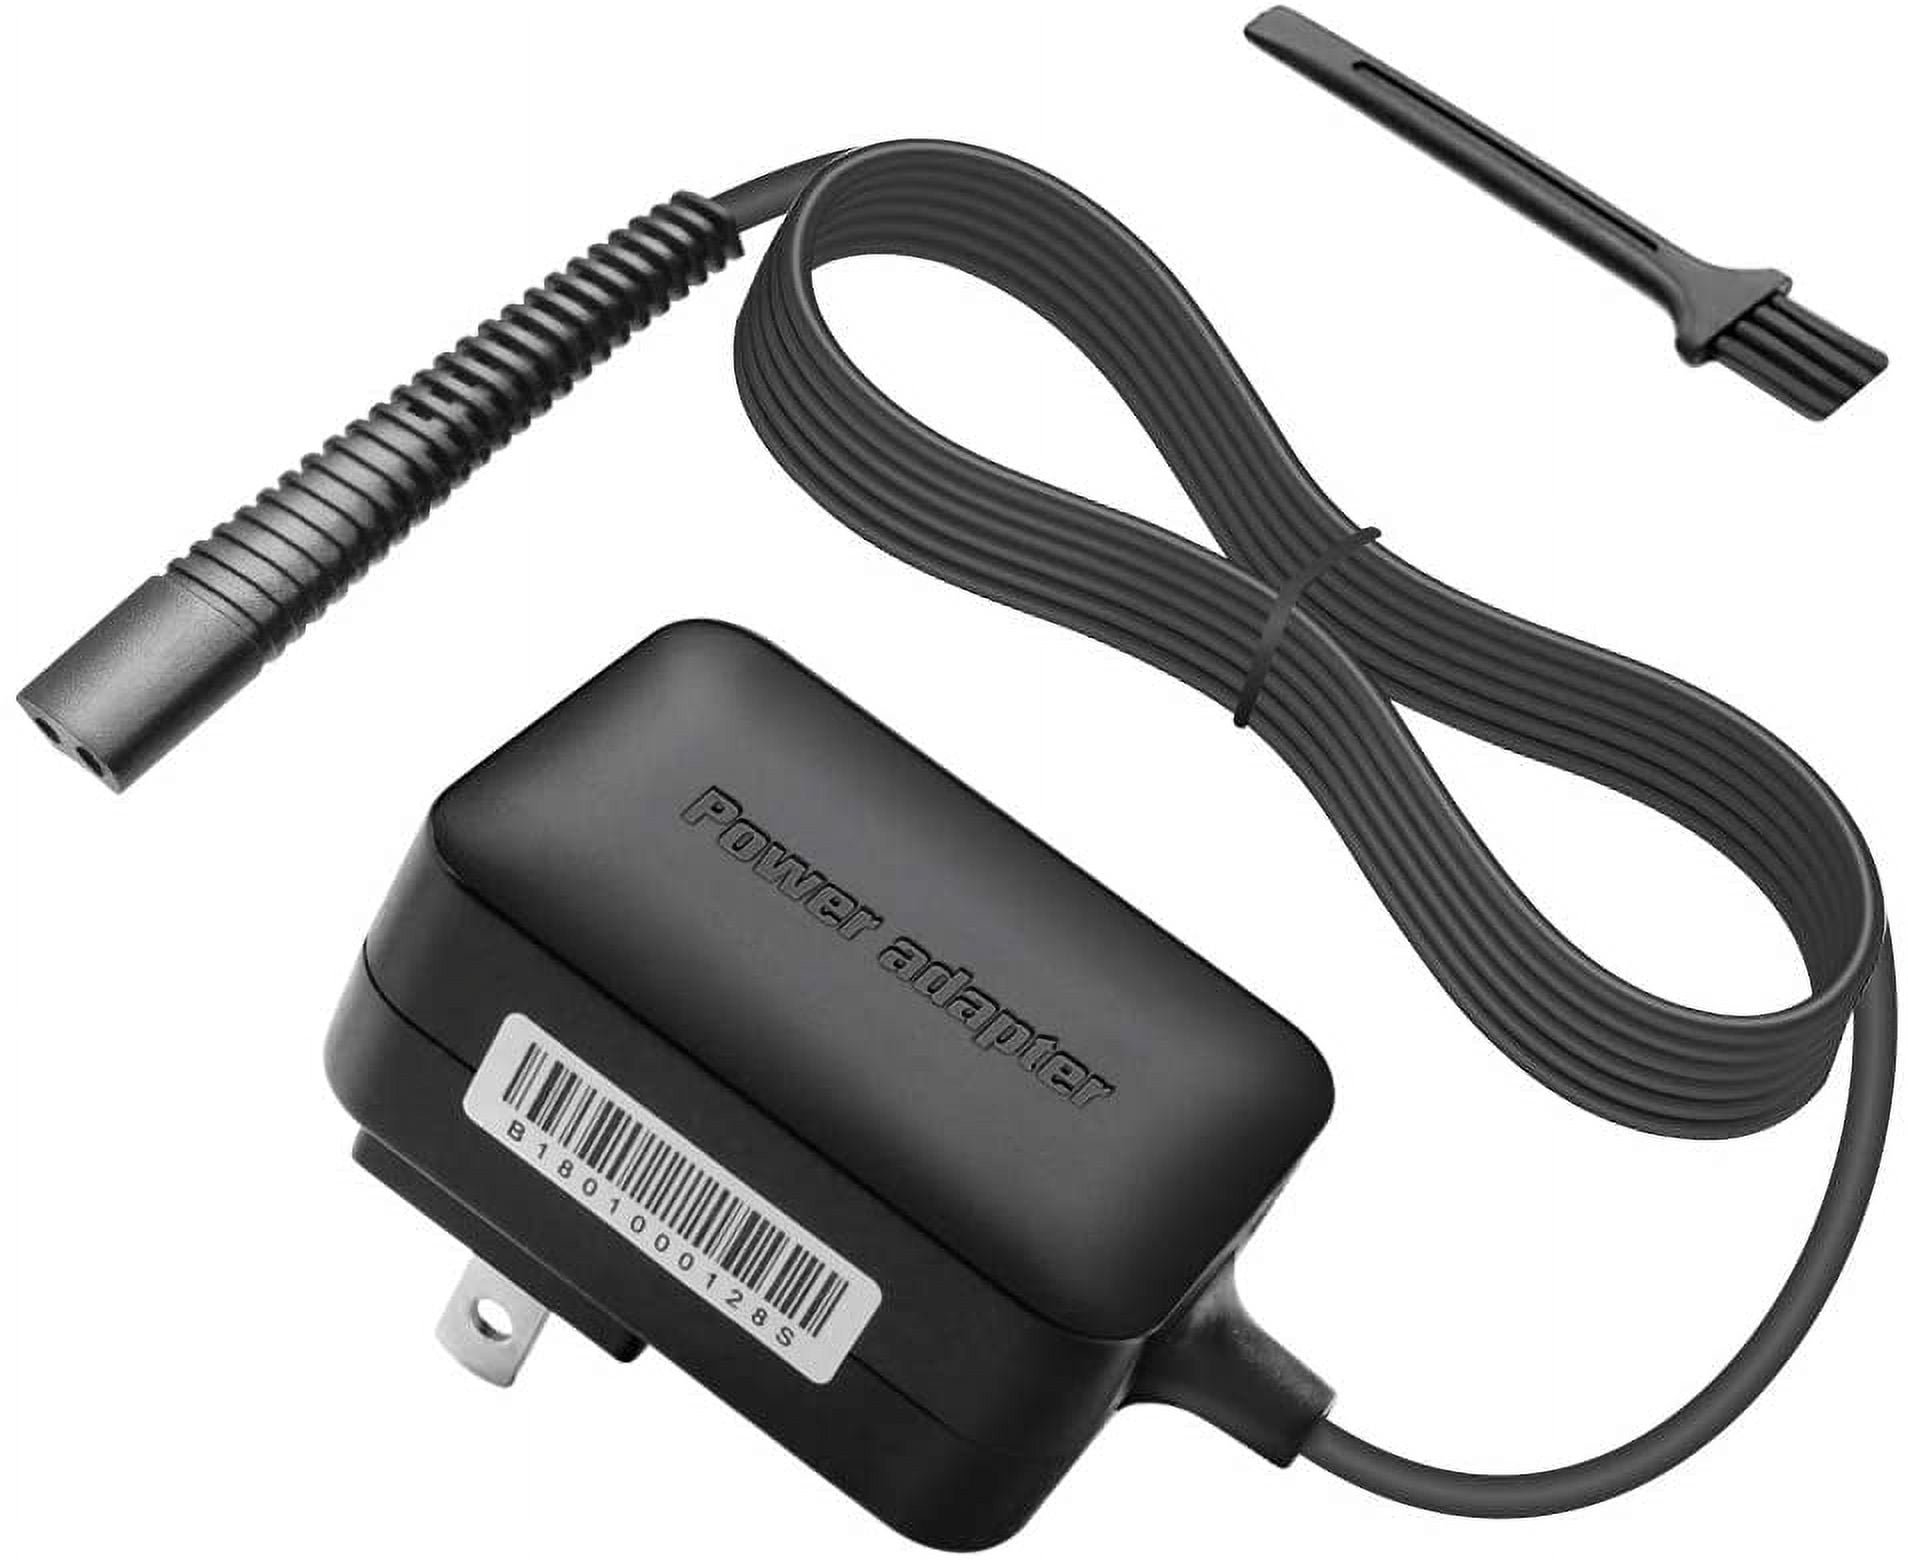 Braun Shaver Charger Cord